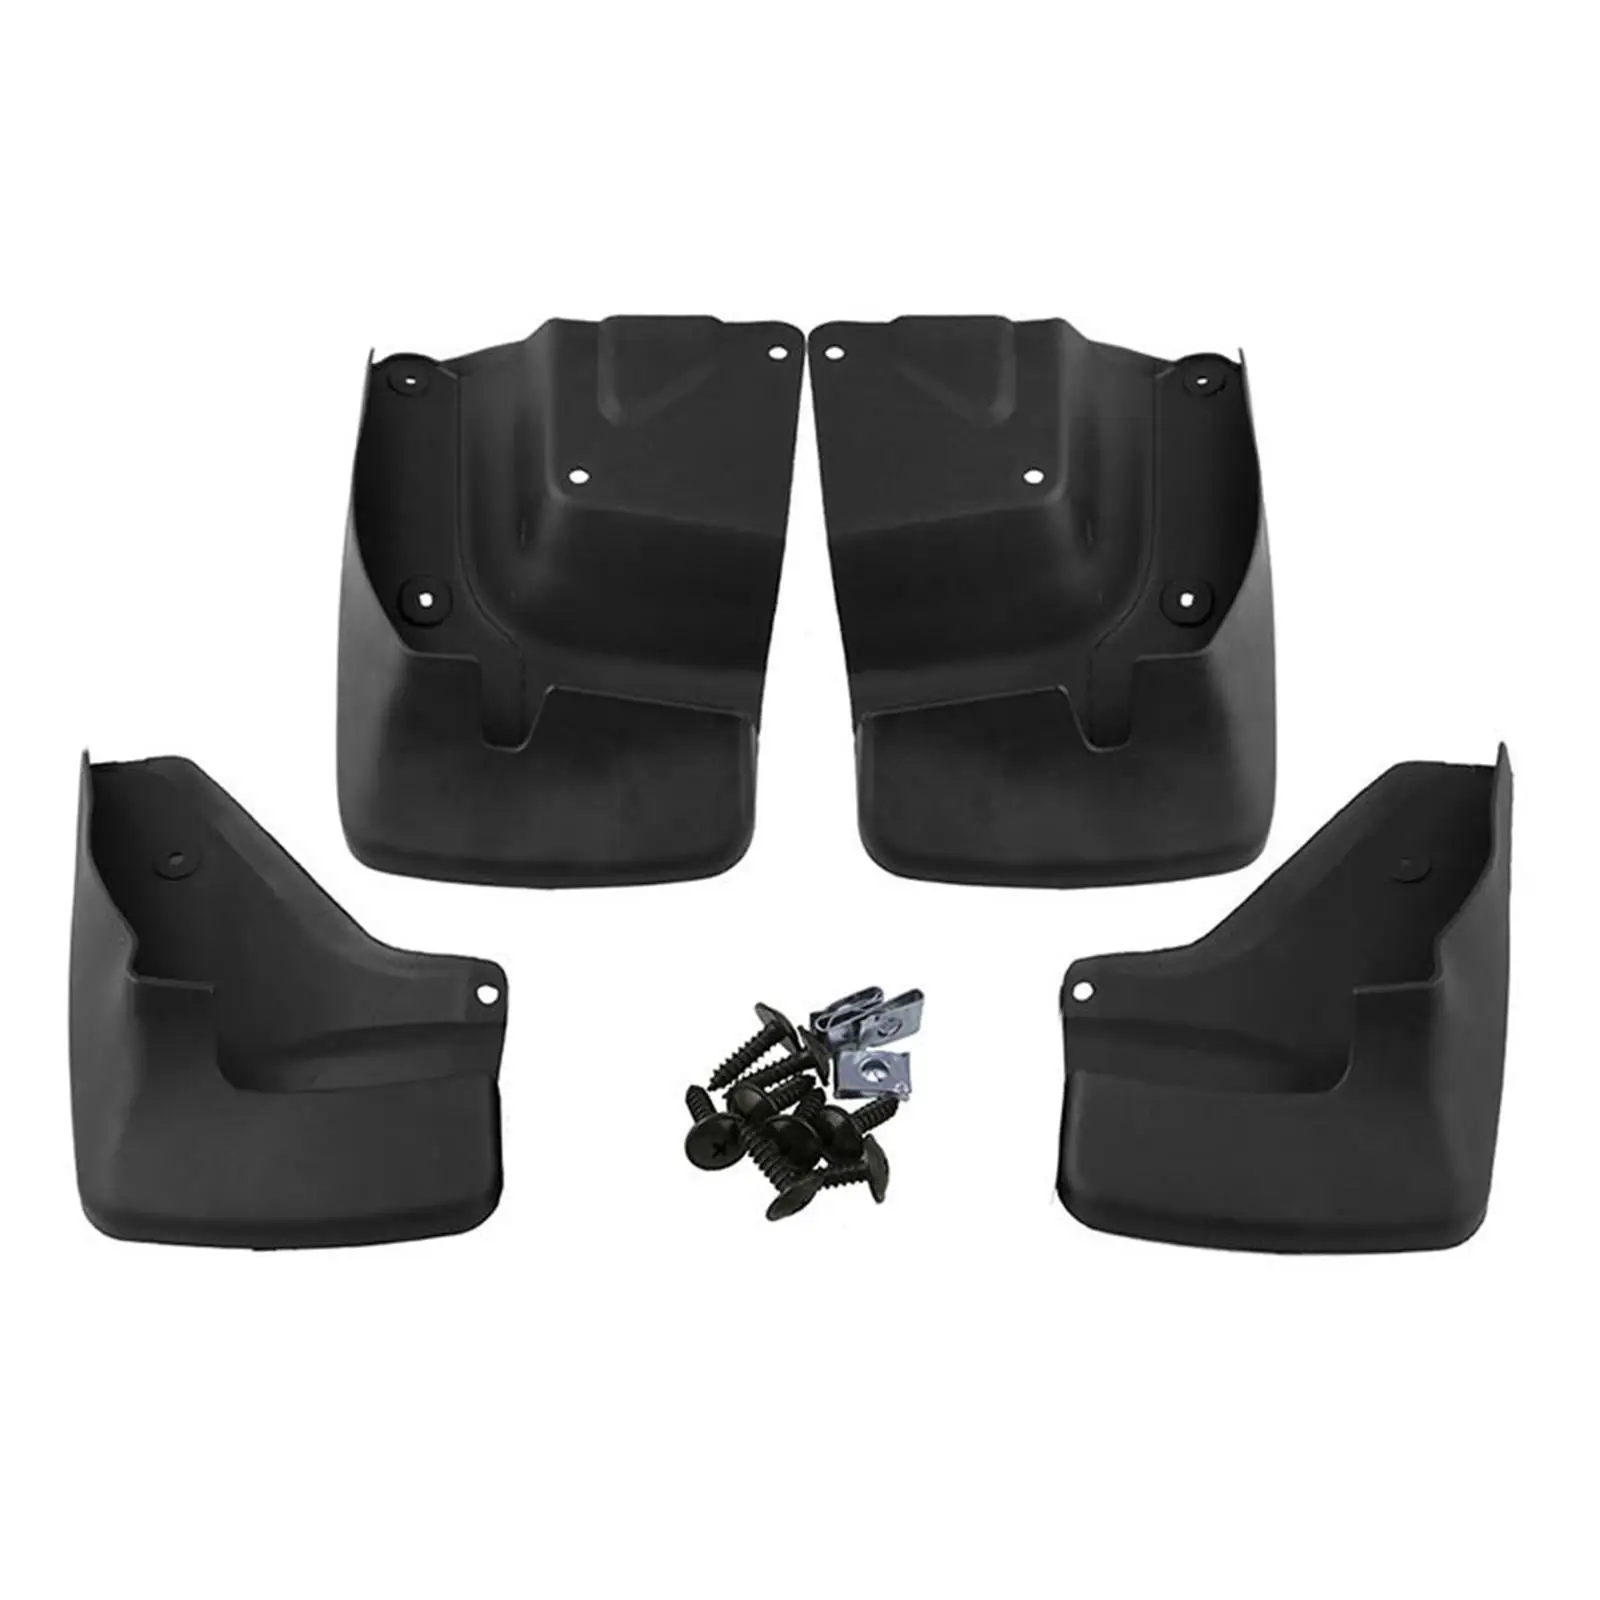 Black Car Mud Flaps 4 Pieces Mud Guards Car Styling Mudguards Durable